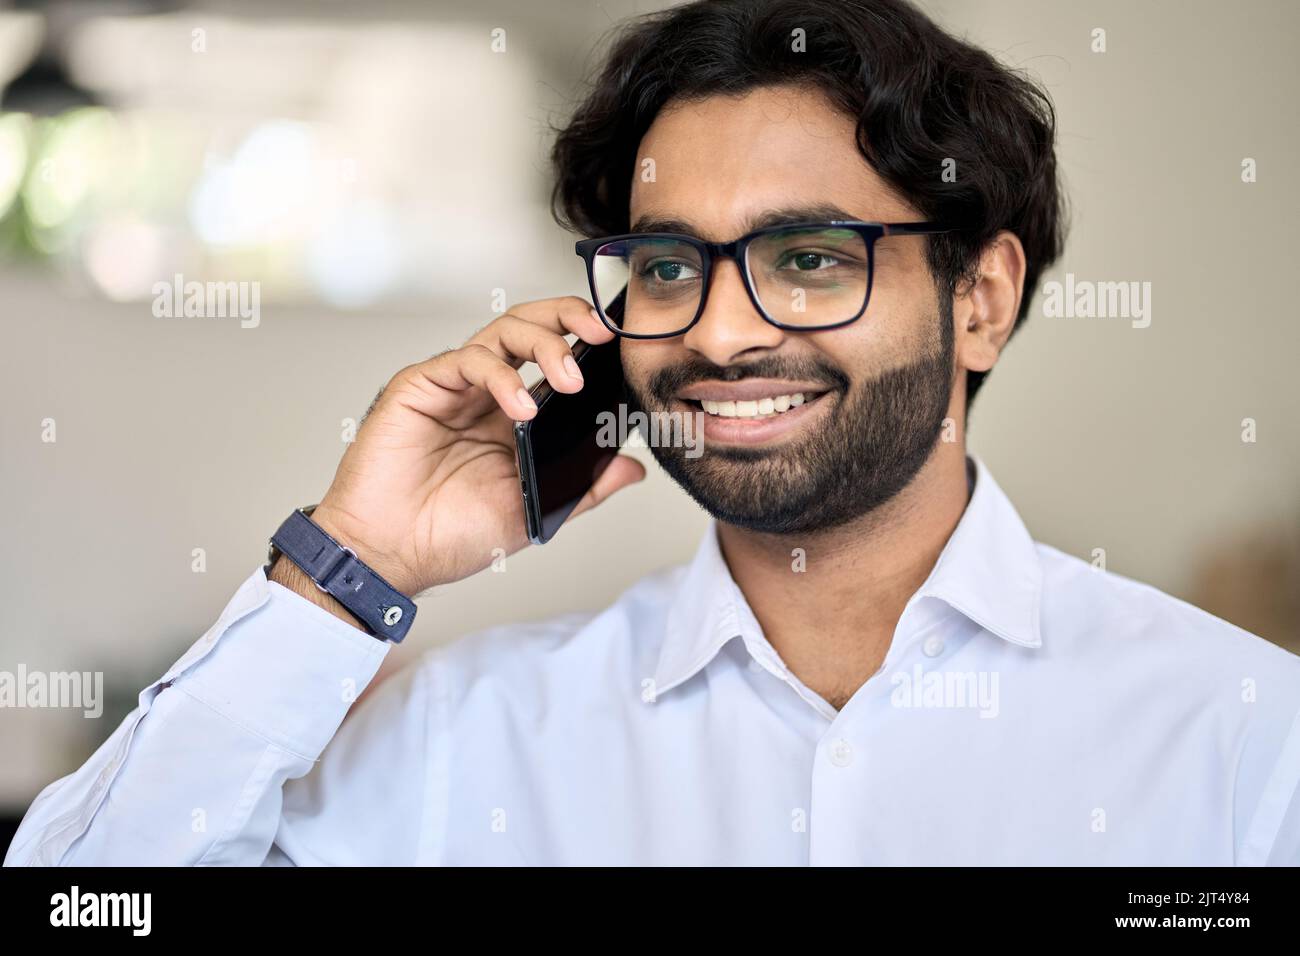 Smiling young indian business man talking on phone making call. Stock Photo